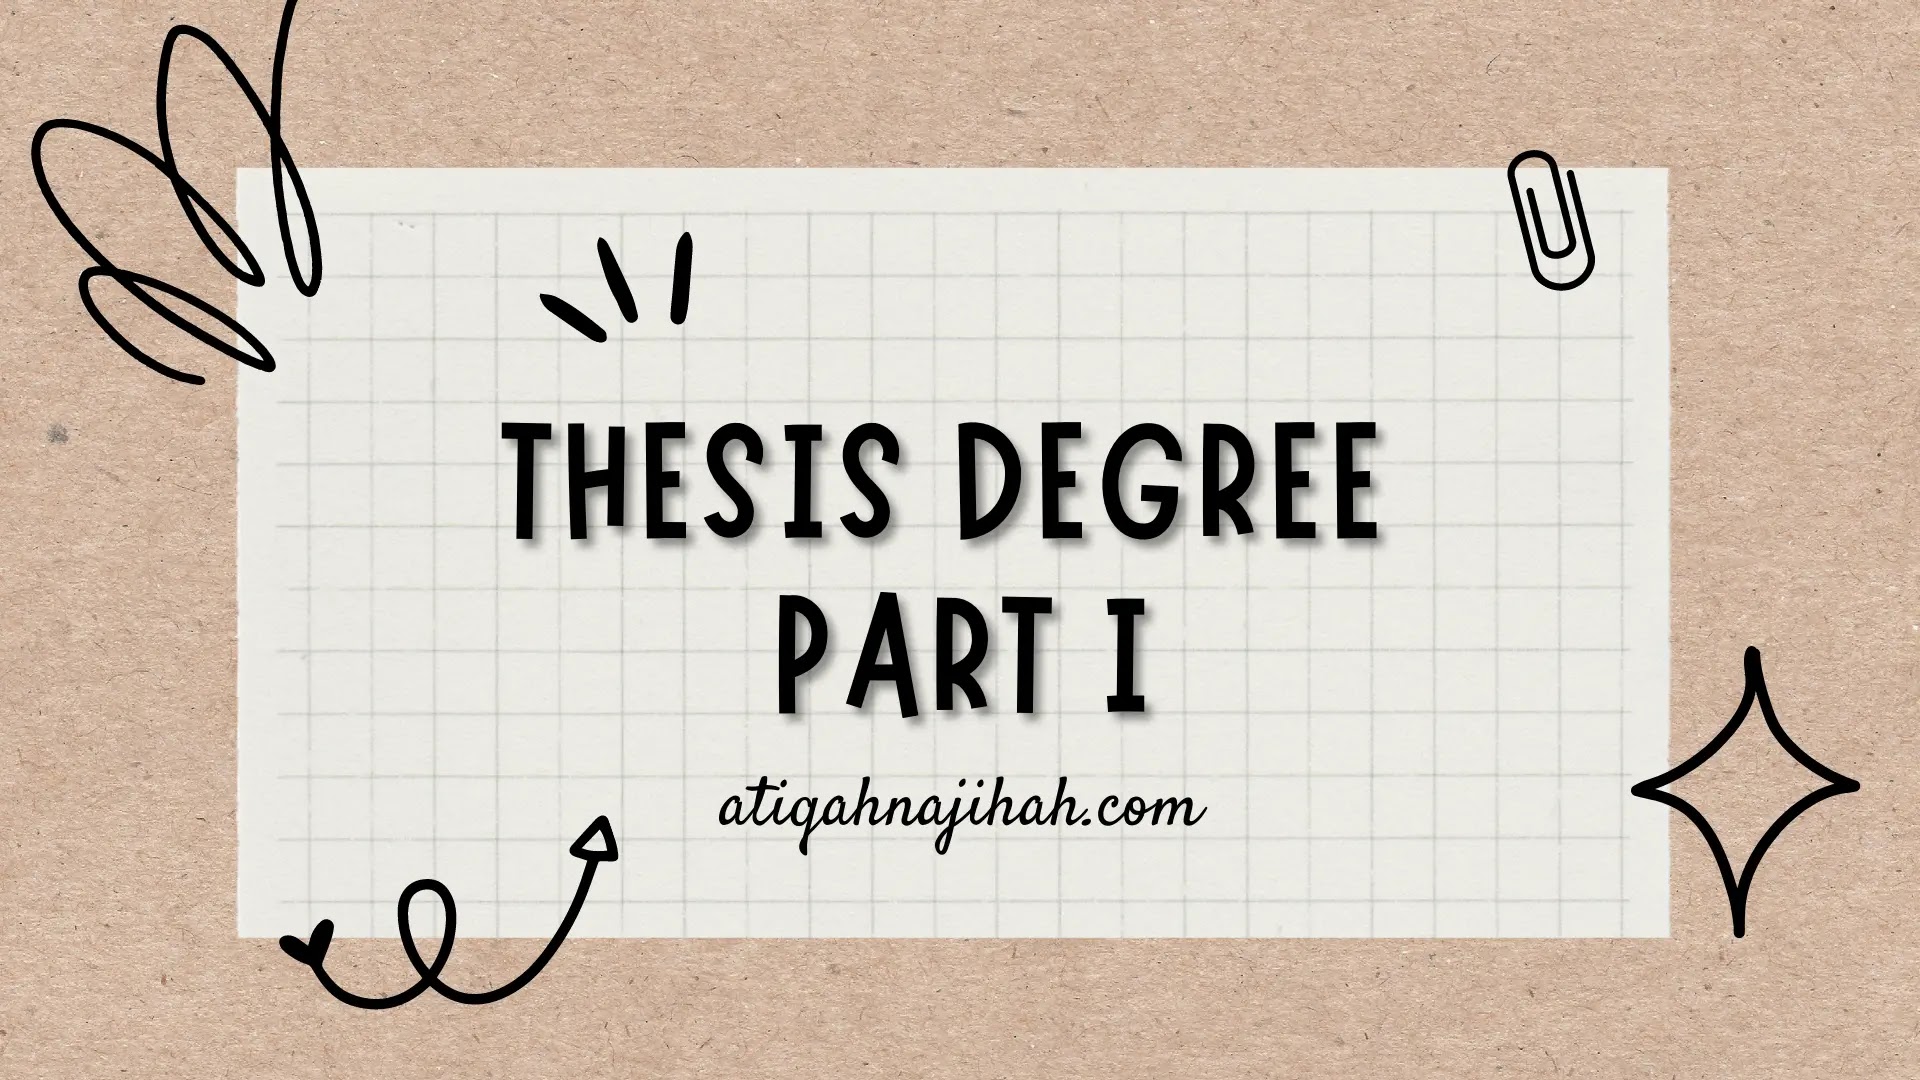 Thesis Degree Part 1